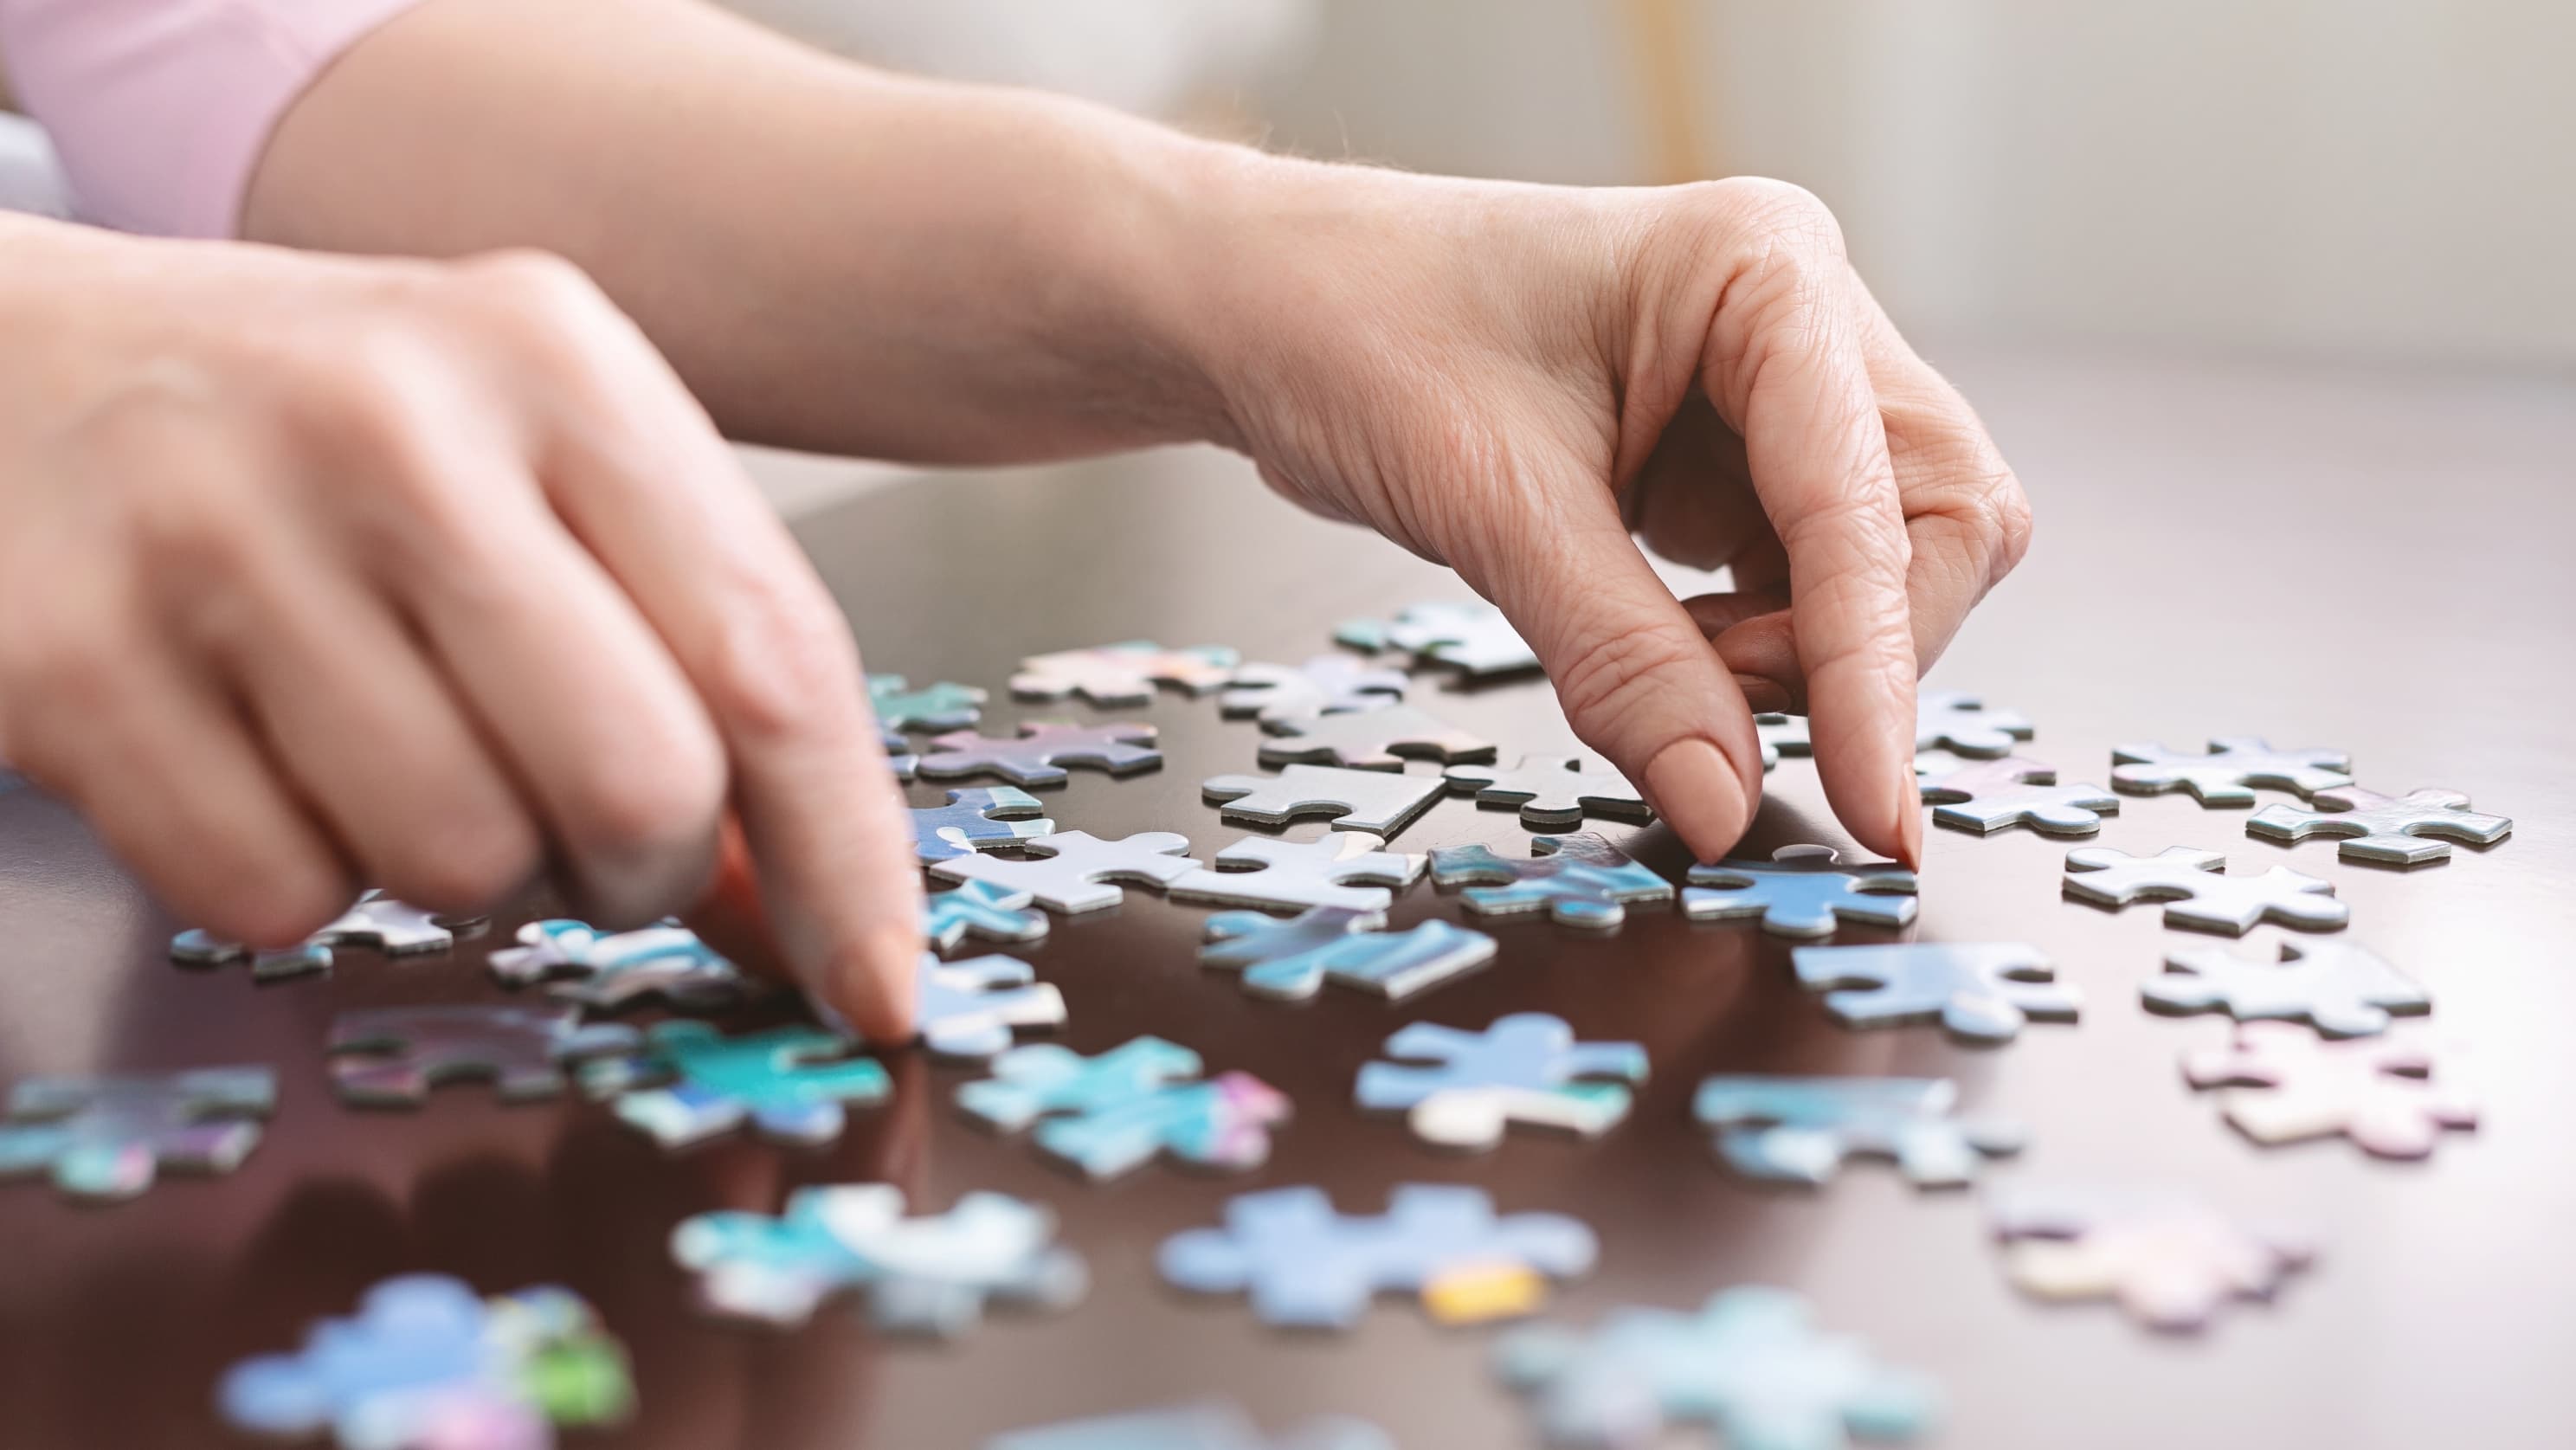 elderly person putting together a jigsaw puzzle, representing the confusion of dementia